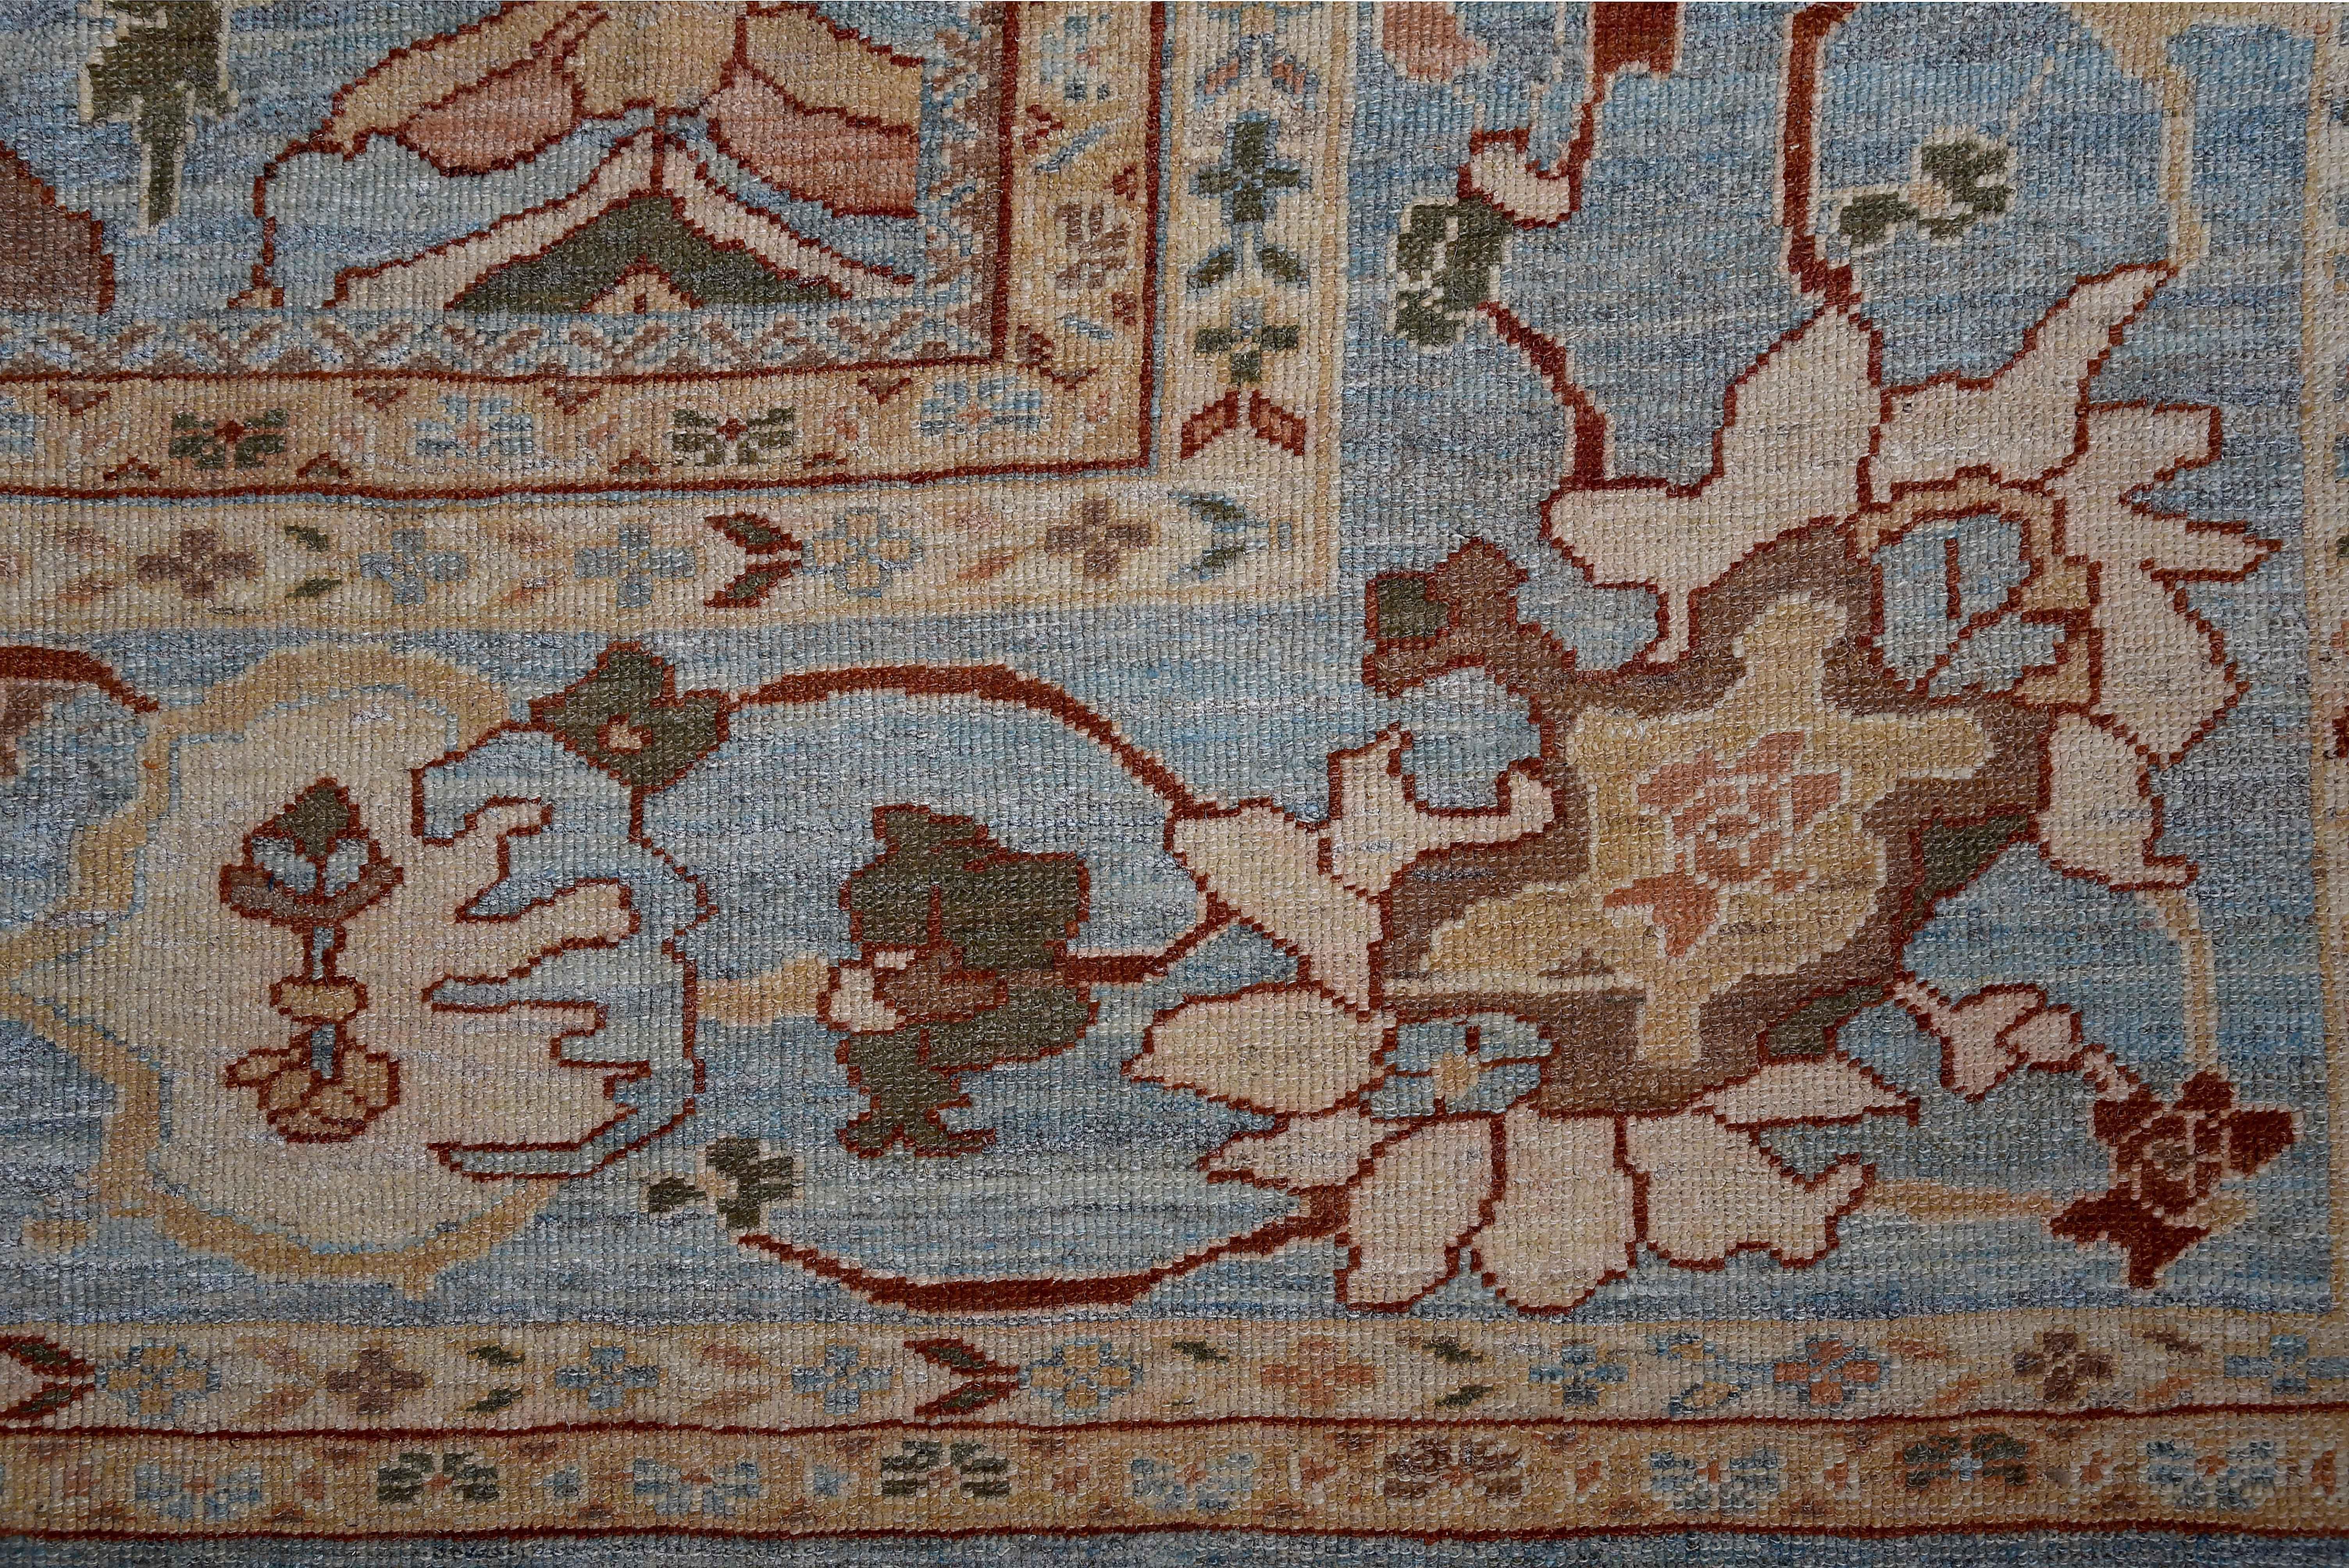 Hand-Woven Large Persian Oushak Style Rug with Beige & Brown Floral Patterns on Blue Field For Sale